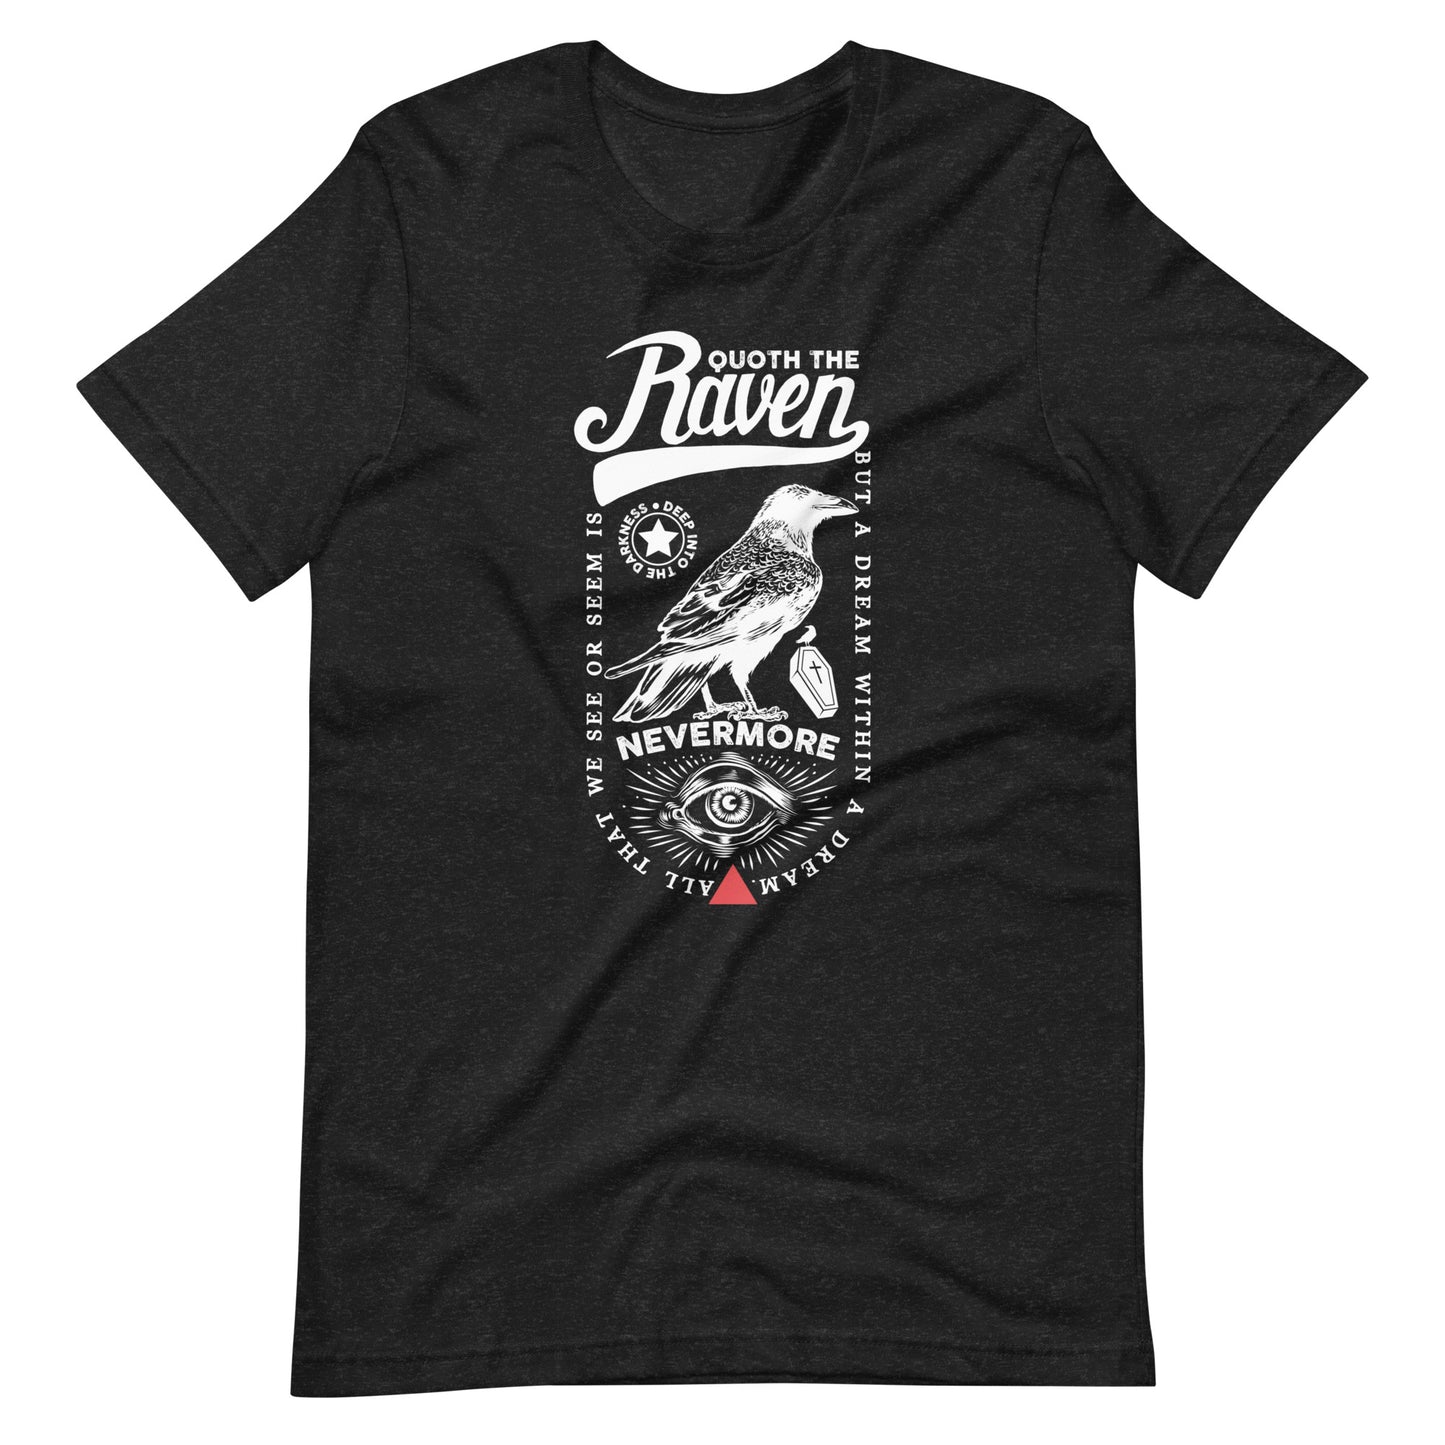 Quoth the Raven Nevermore Loaded - Men's t-shirt - Black Heather Front